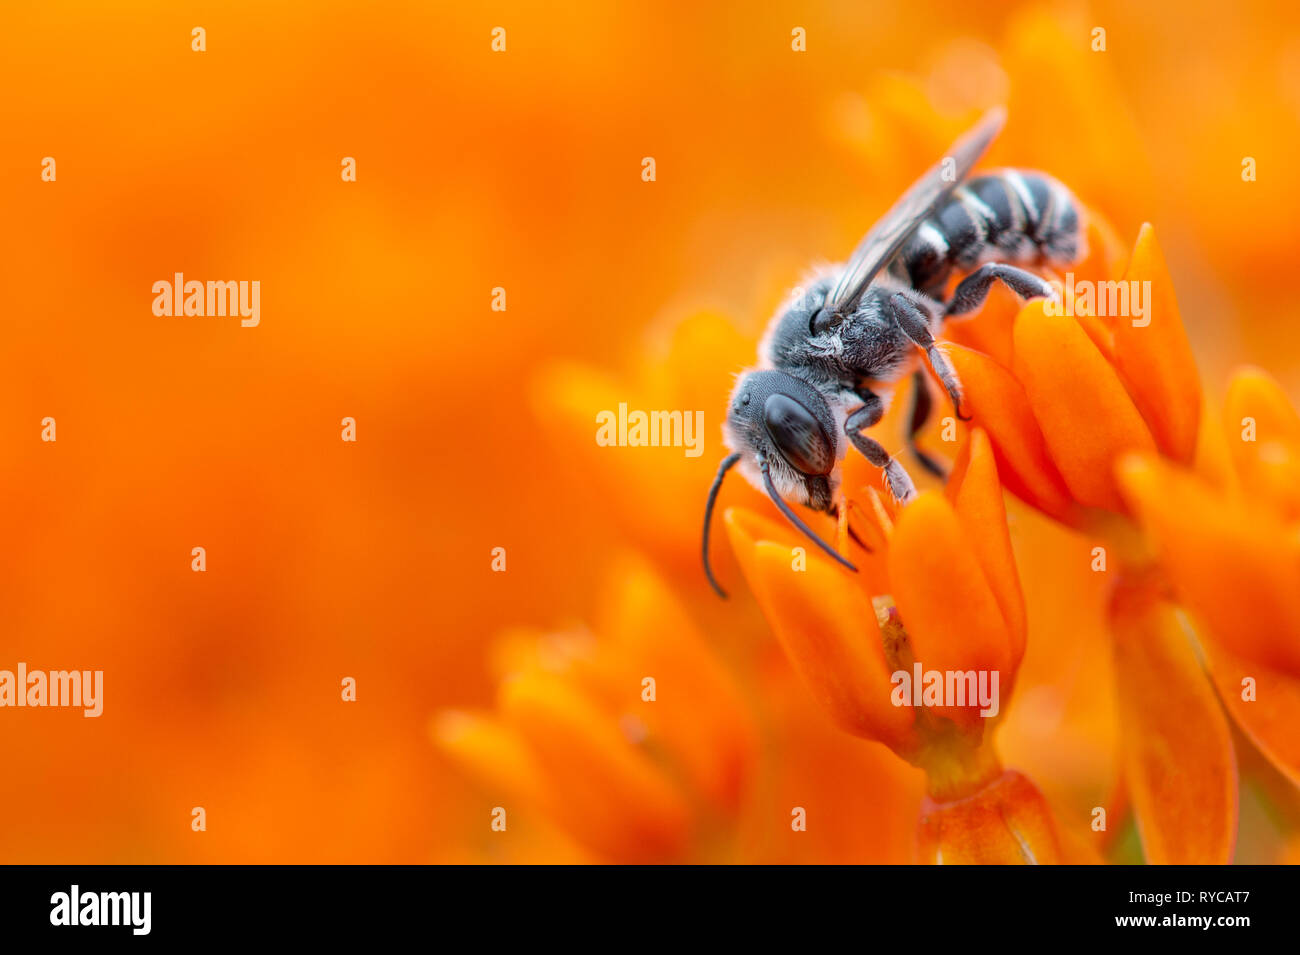 A close up of a  Leaf Cutting Bee walking on a bright orange Butterfly Weed flower. Stock Photo